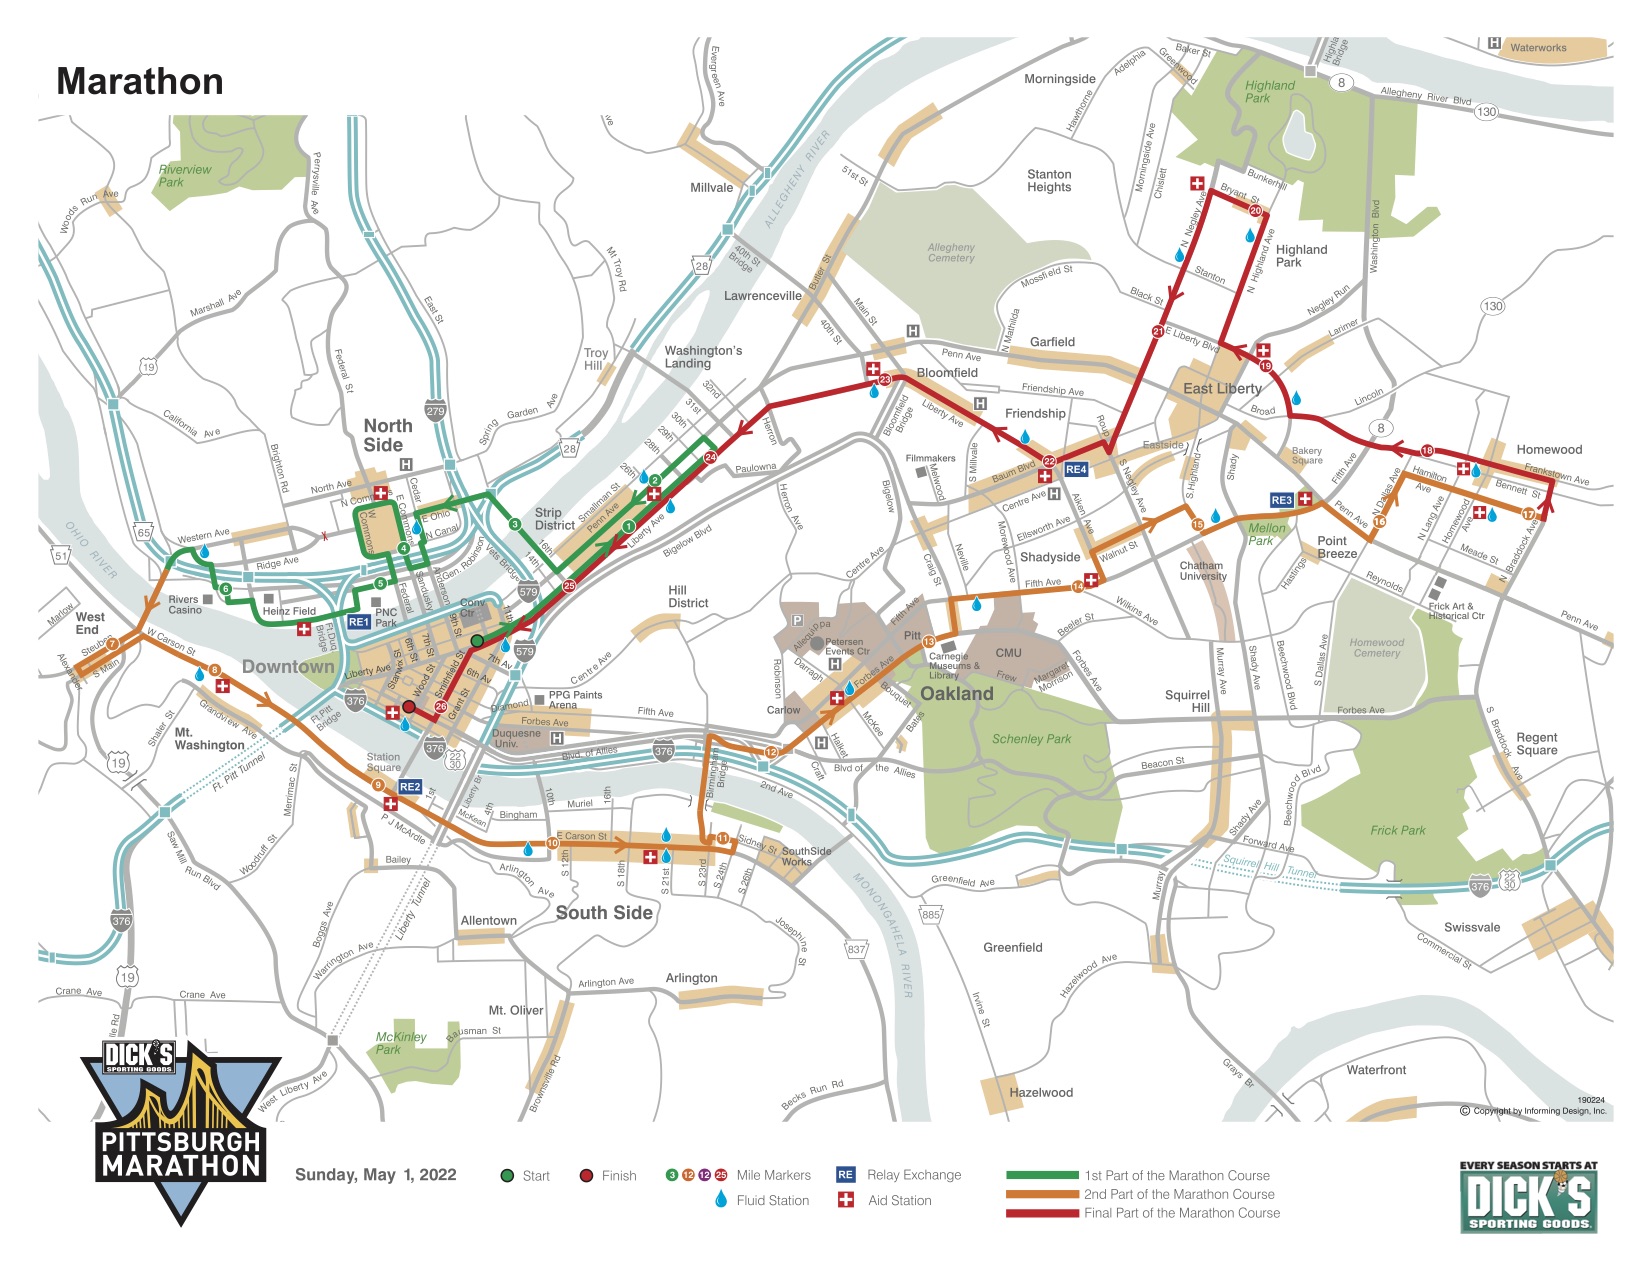 A milebymile guide to the buildings along the Pittsburgh Marathon route